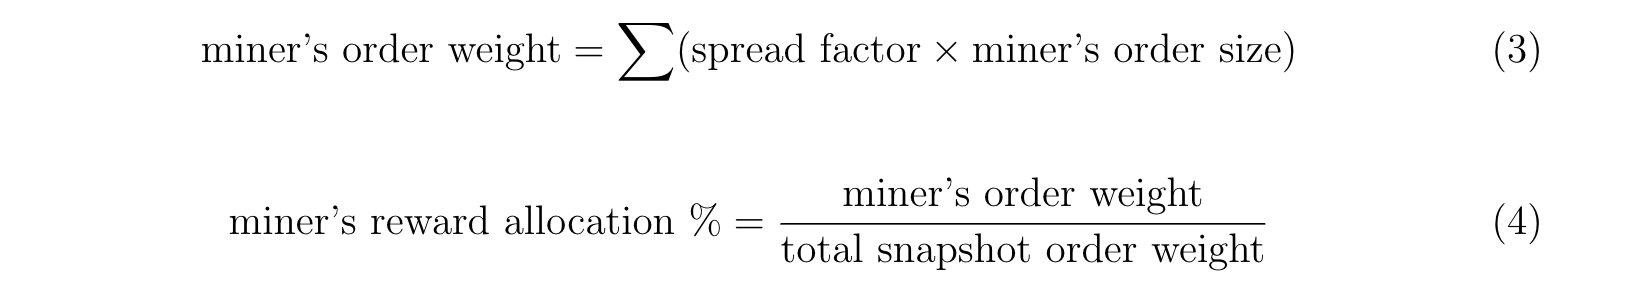 3+4-miners-allocation